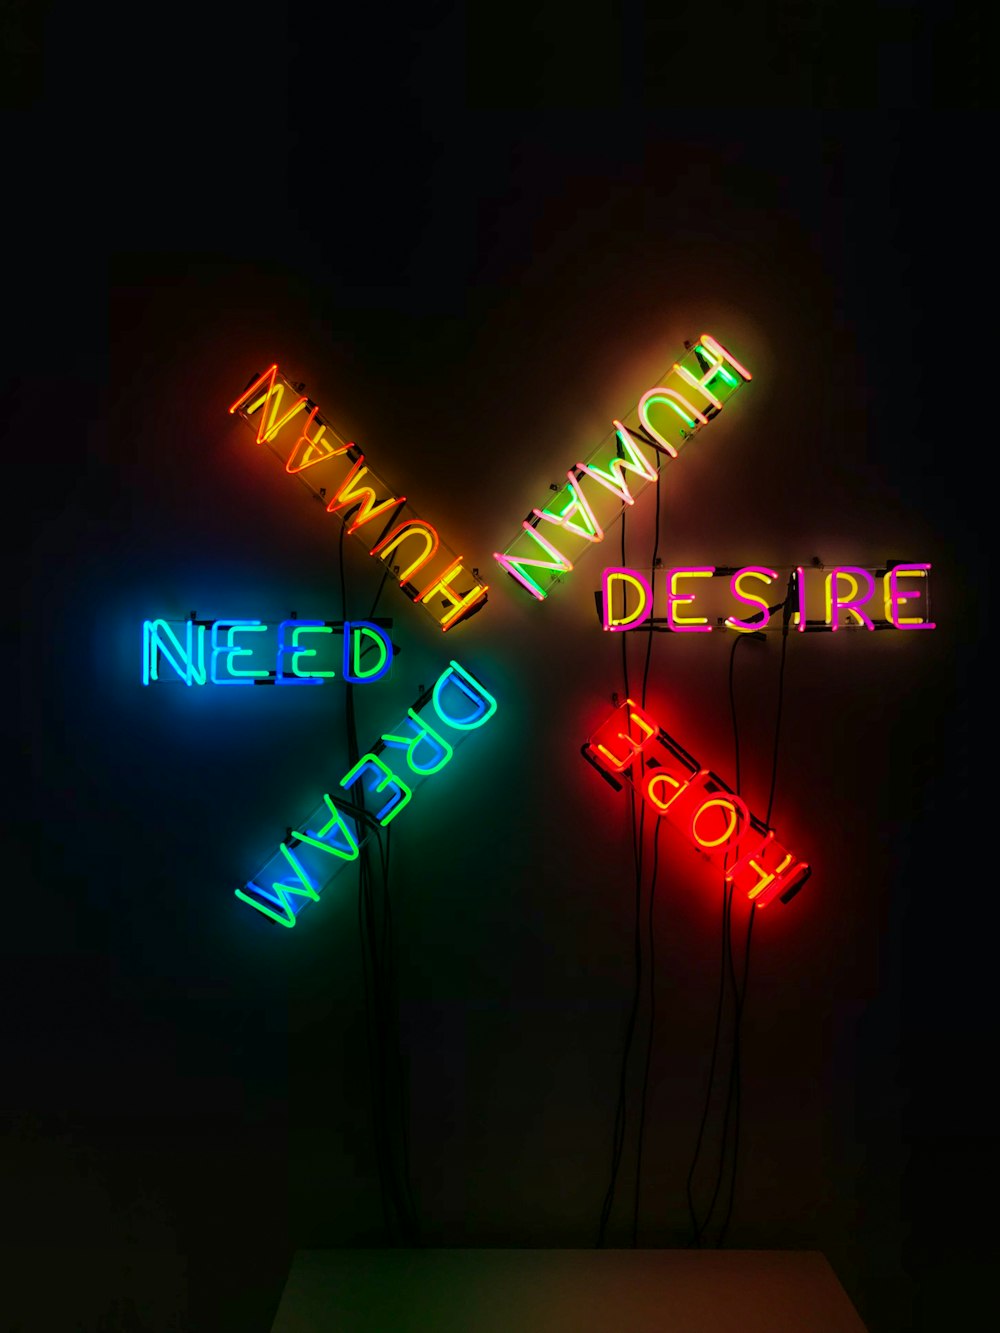 Human, Desire, Hope, Need, and Dream neon light signage